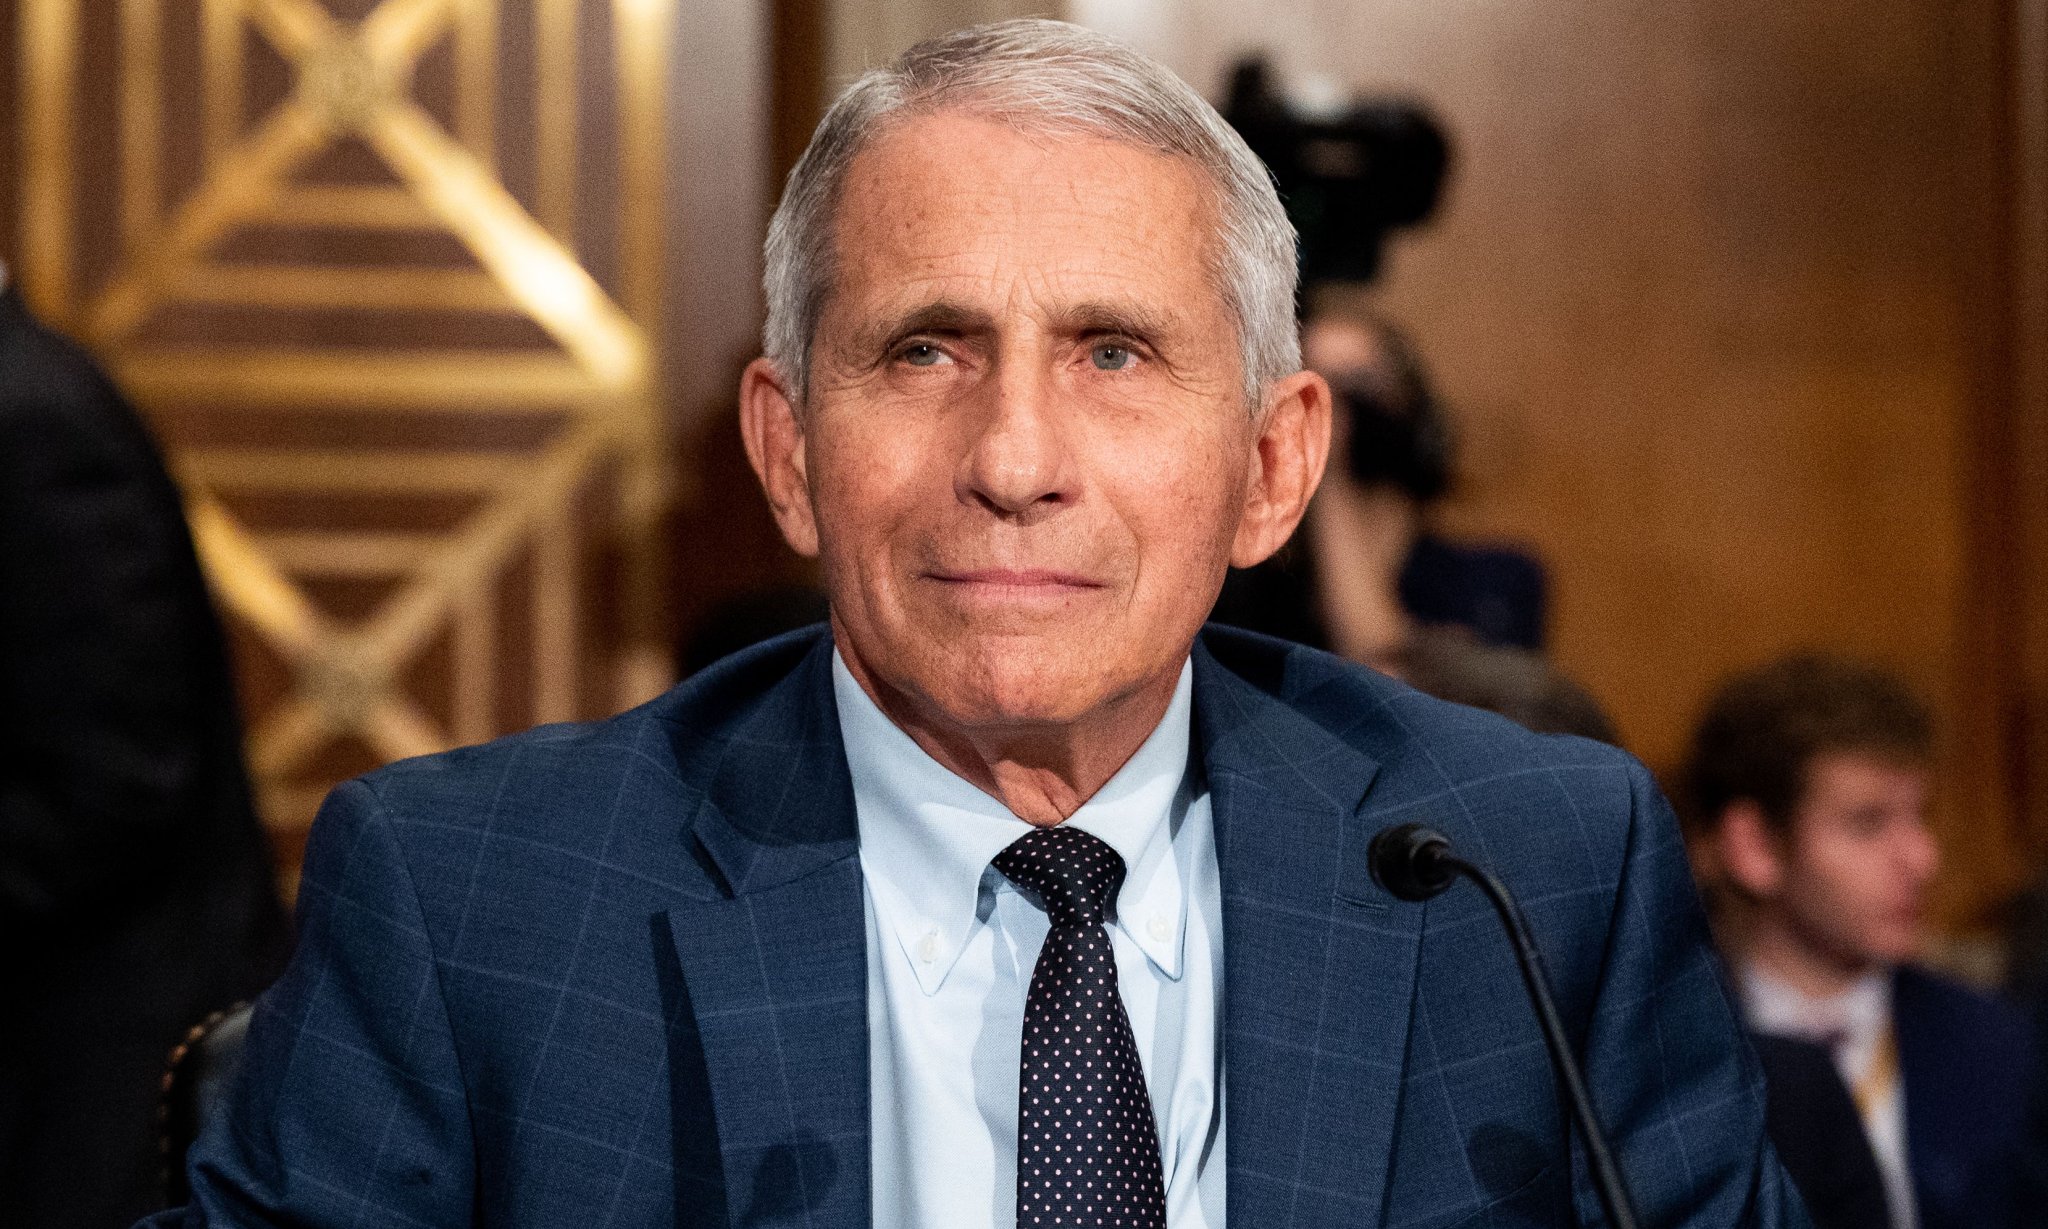 Fauci says health officials considering mask guidance revision for vaccinated